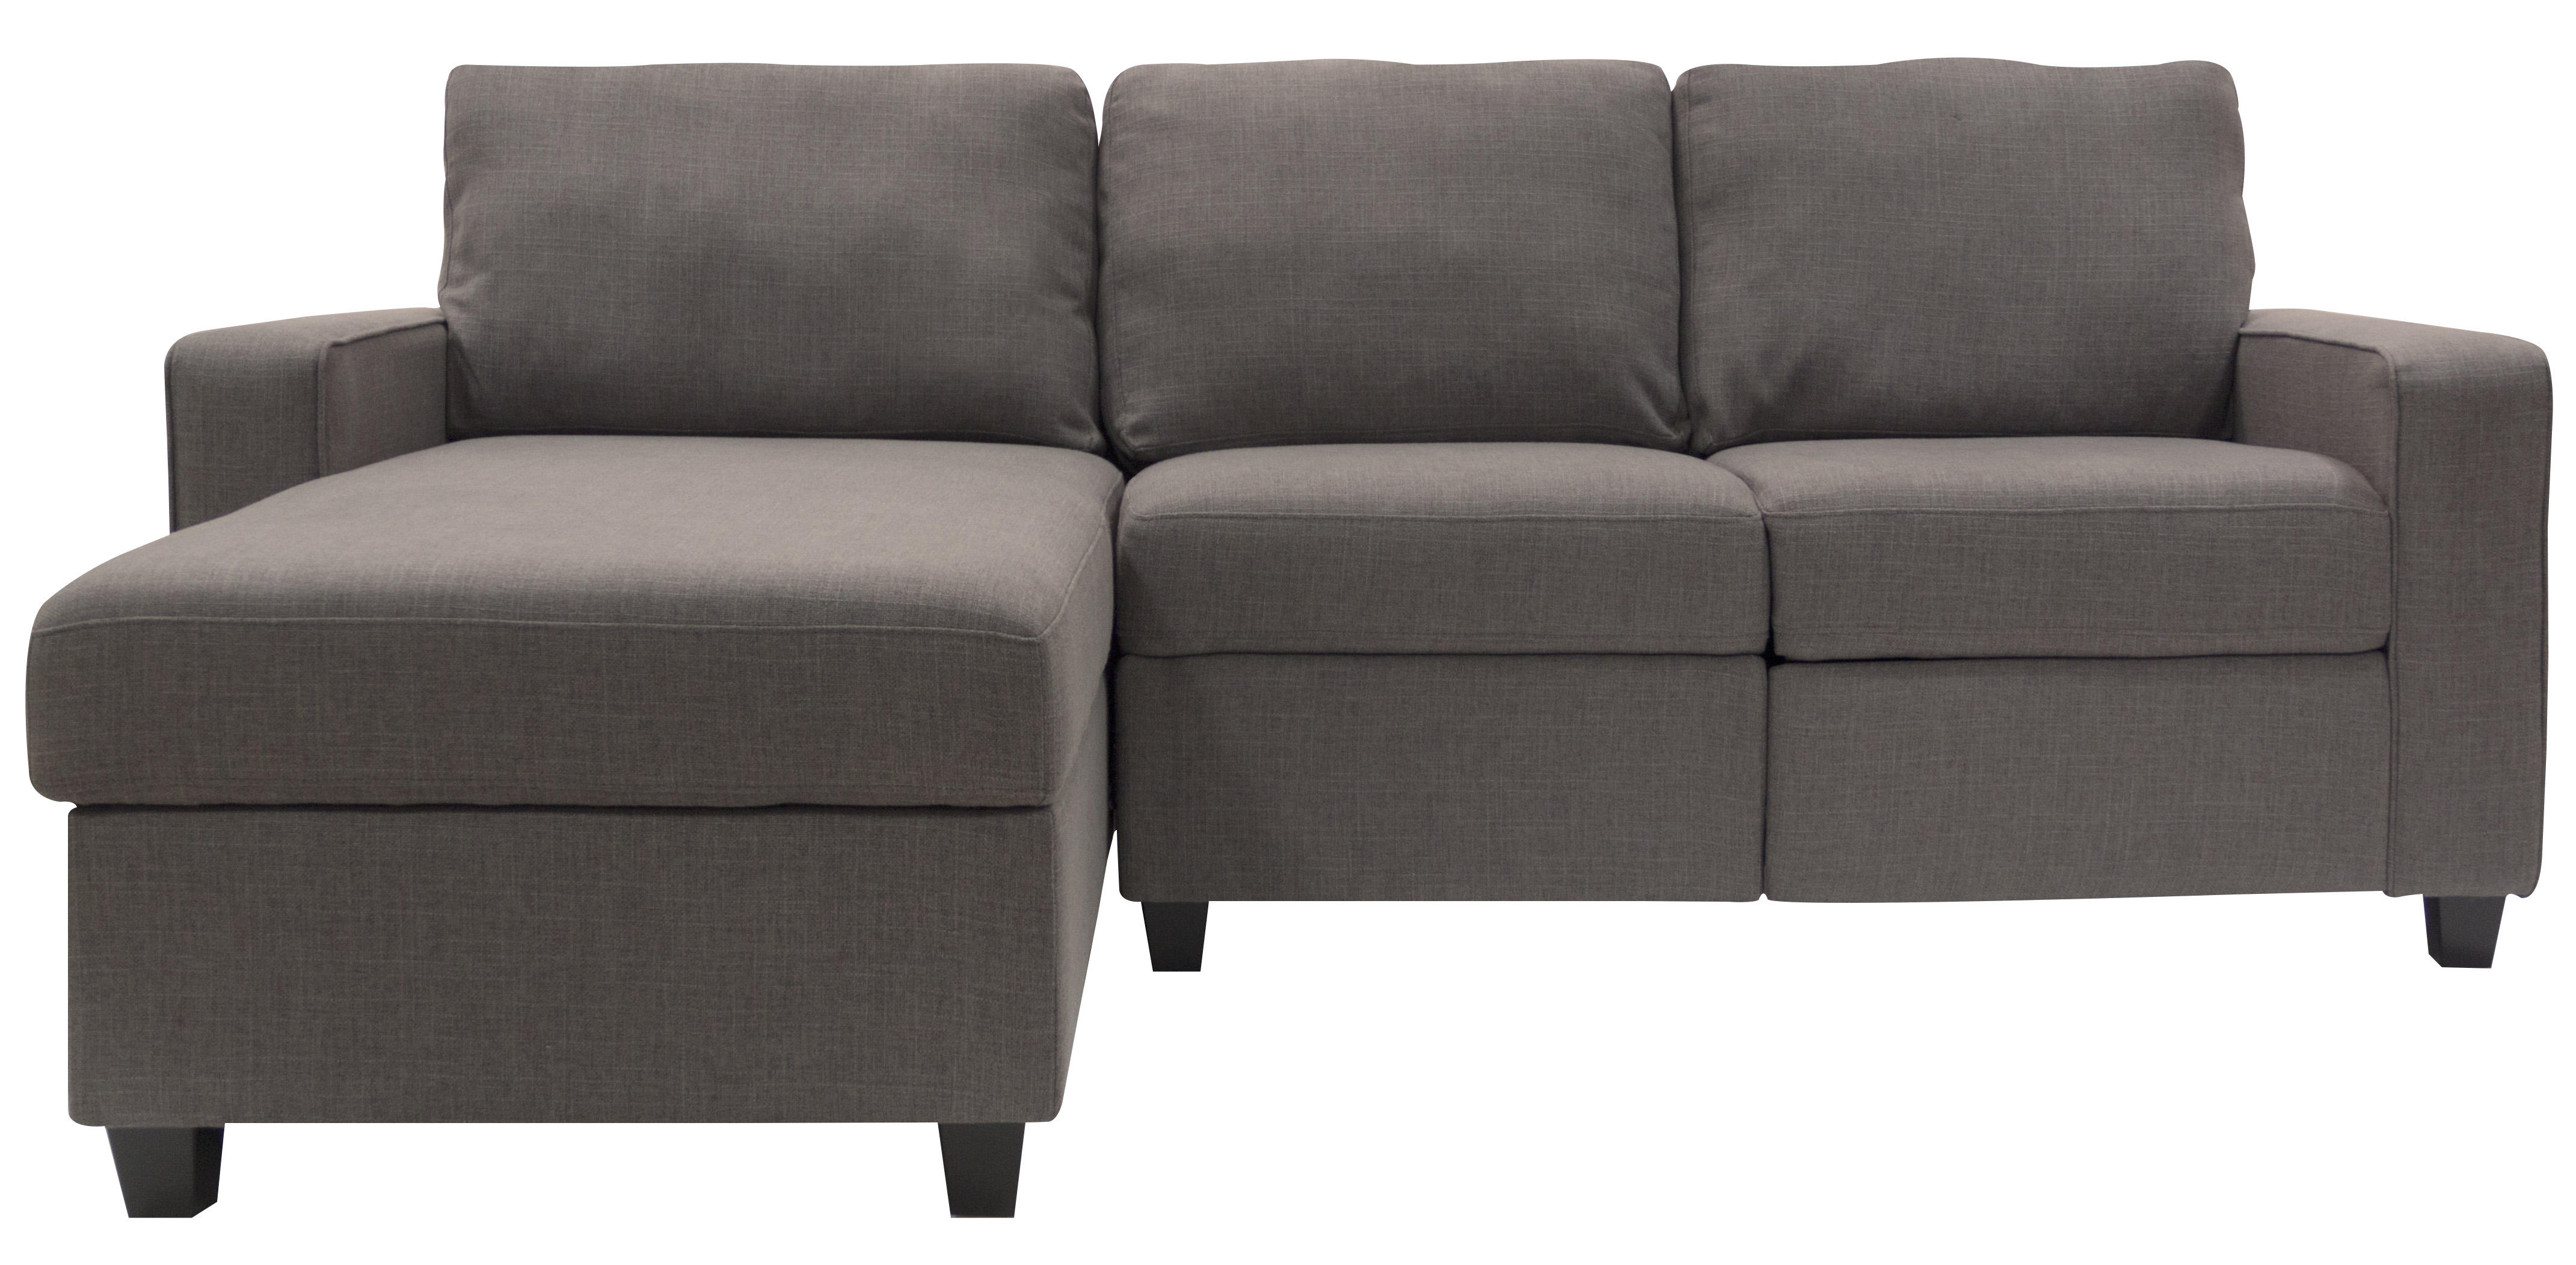 Serta Palisades Reclining Sectional with Left Storage Chaise - Gray - image 5 of 9